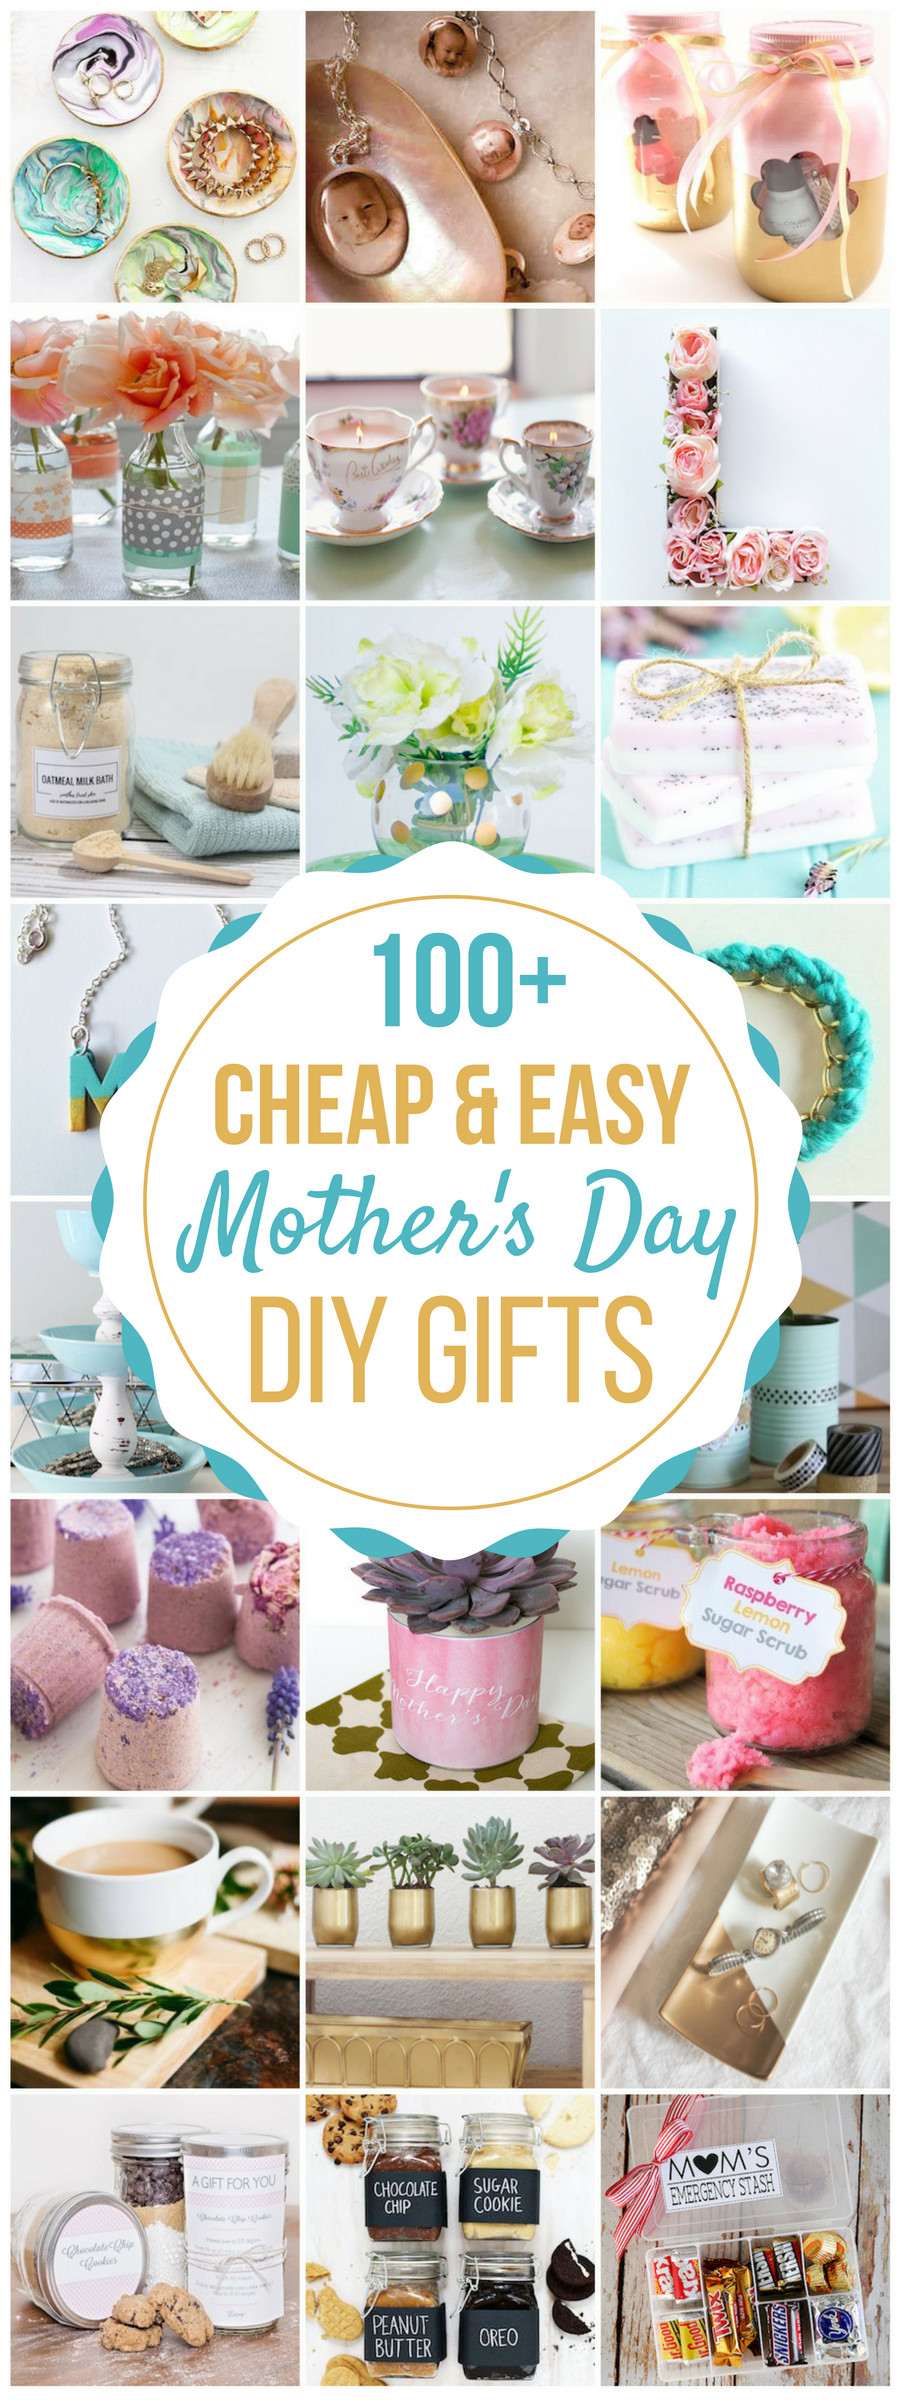 Valentine'S Day Gift Ideas For Mom
 100 Cheap & Easy DIY Mother s Day Gifts Prudent Penny